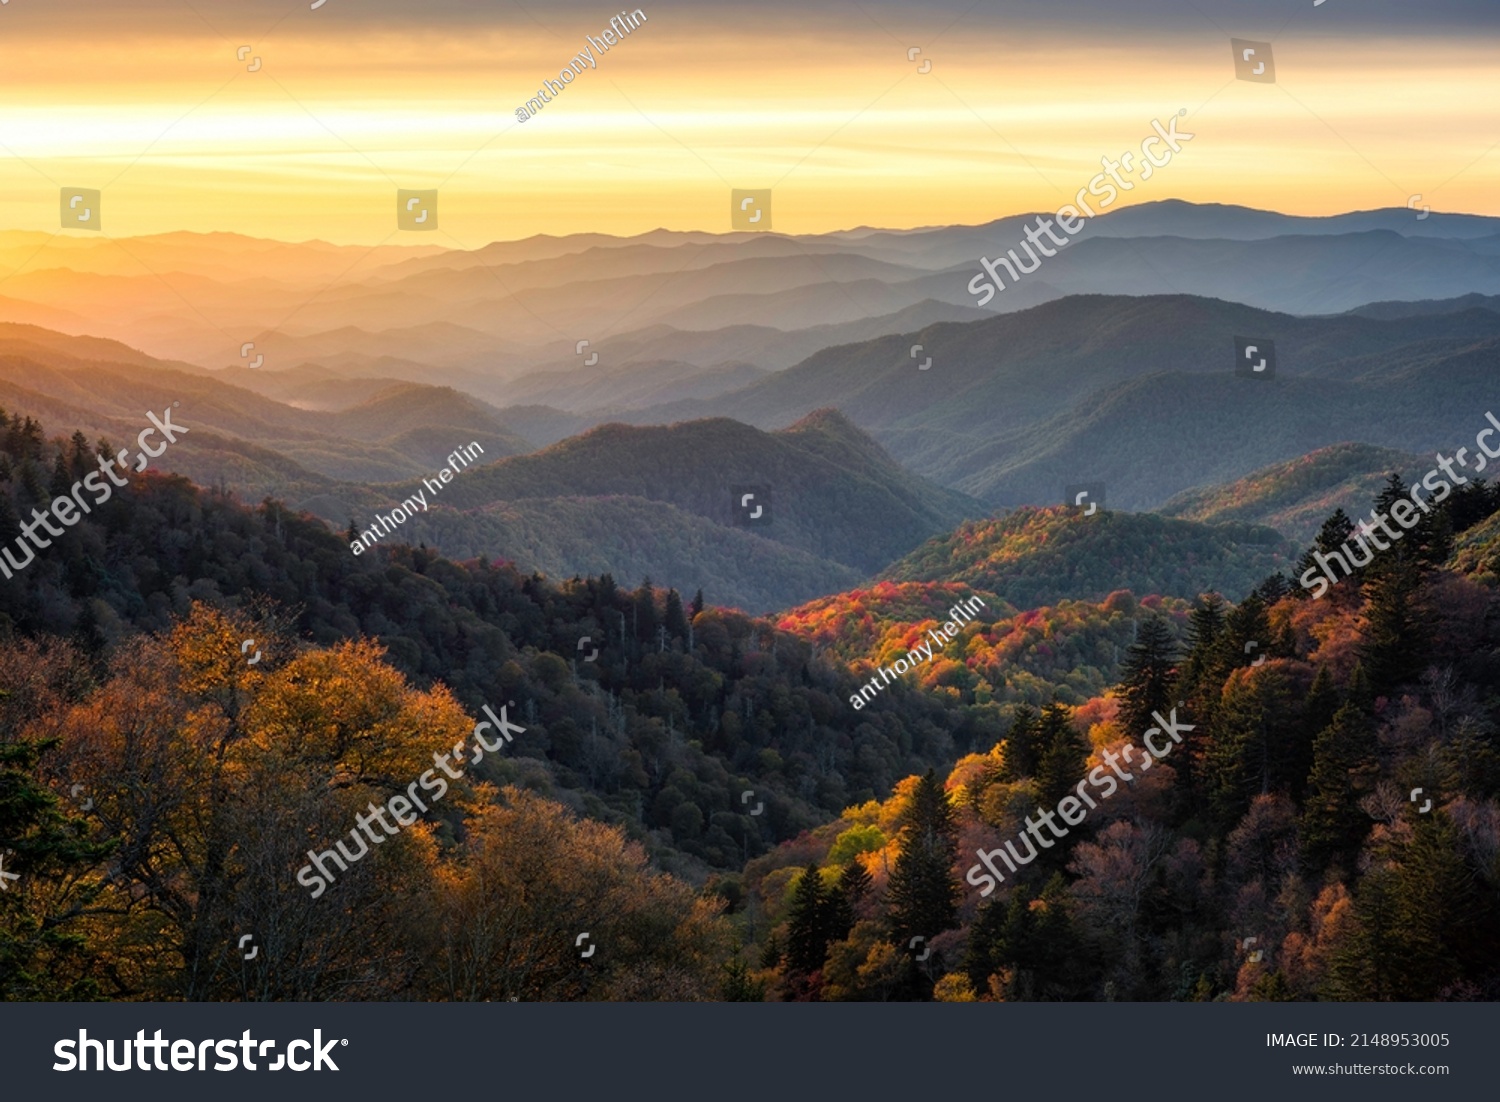 Dramatic evening light looking out across the Great Smoky Mountains from along the Blue Ridge Parkway in North Carolina #2148953005